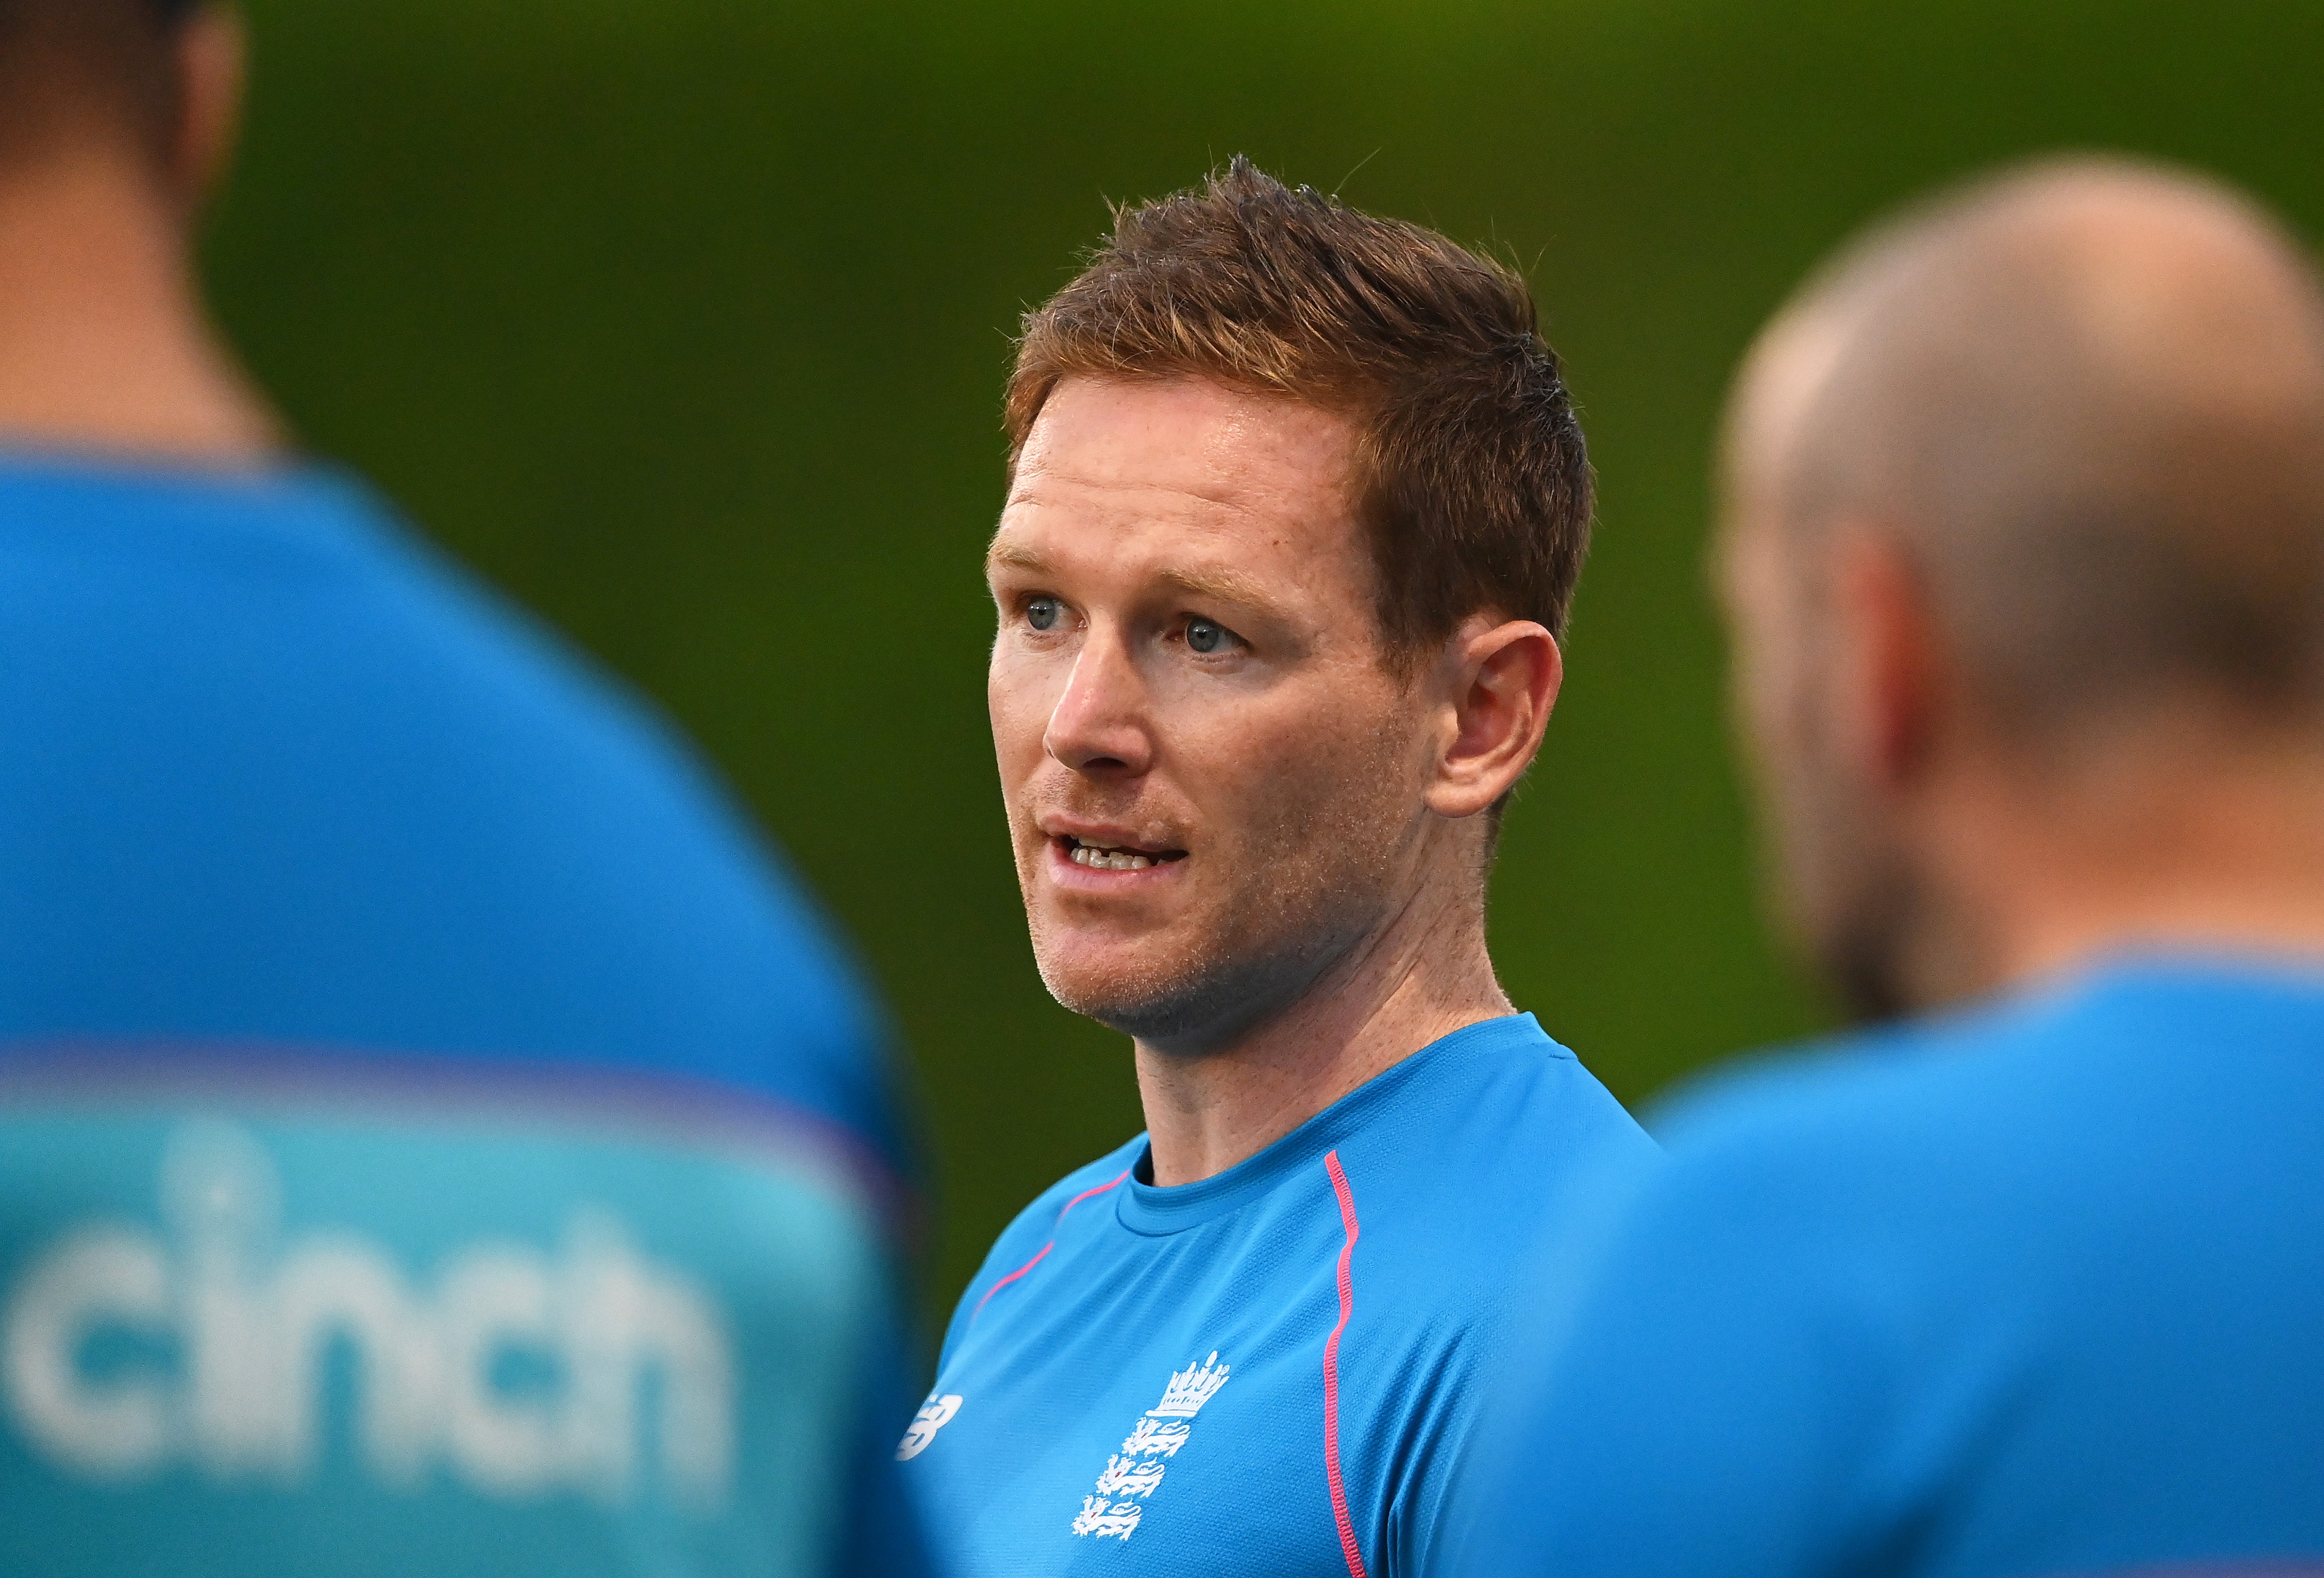 Eoin Morgan will lead England into the World Cup